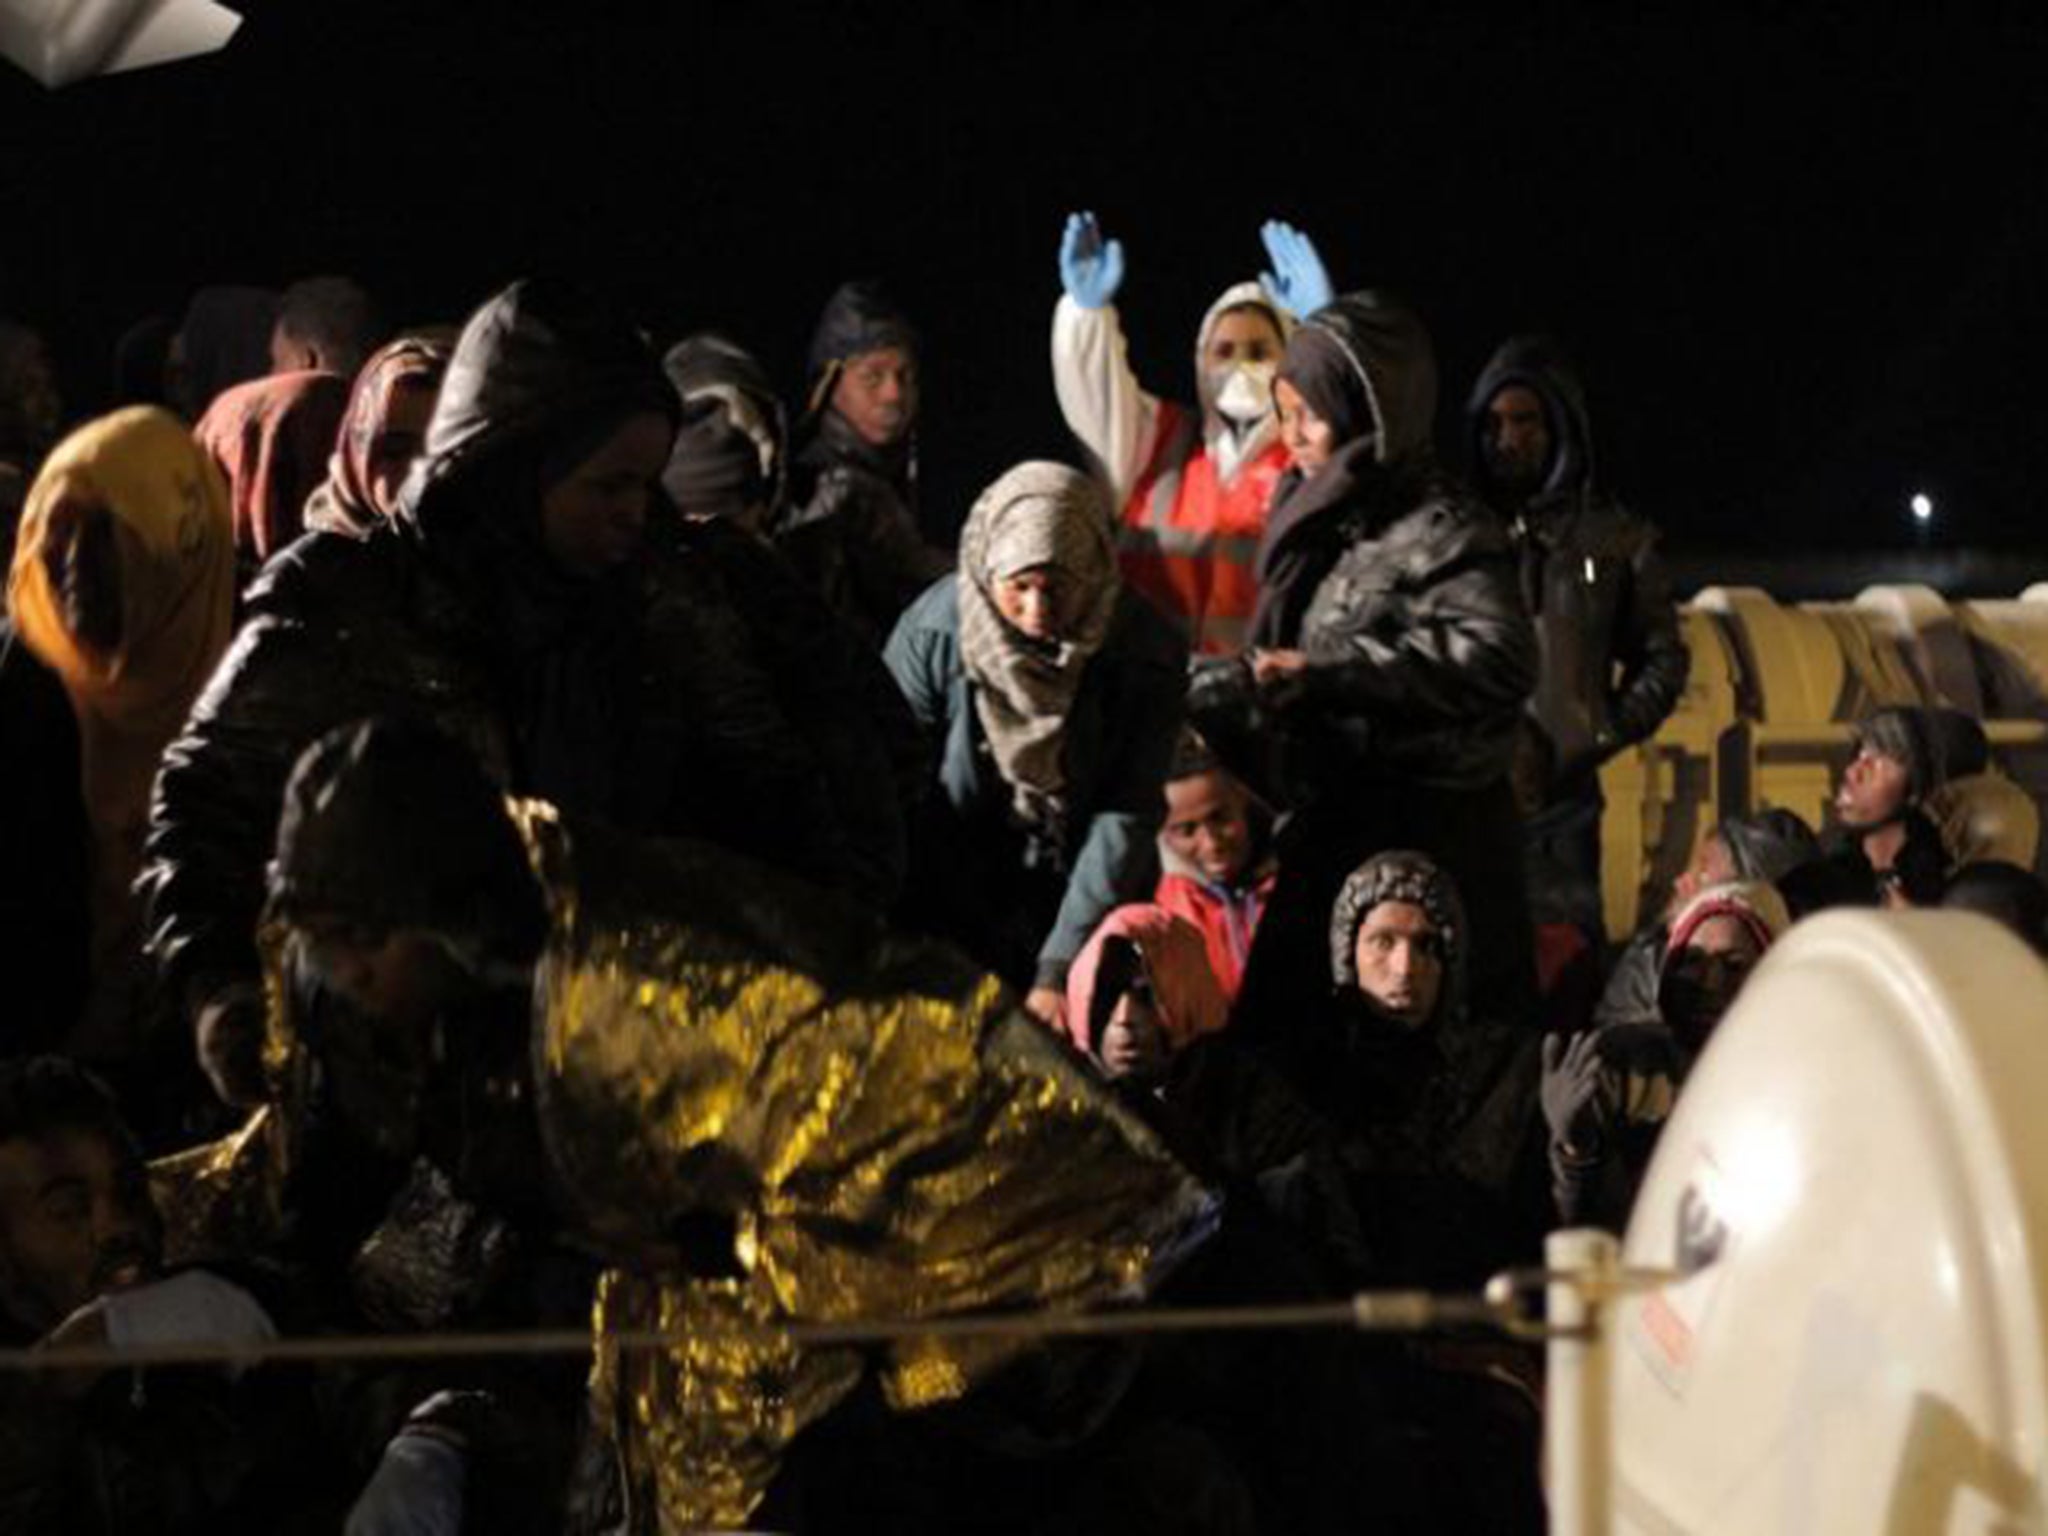 Migrants rescued by the Italian coastguard disembarking in Agrigento province, Sicily, on Monday